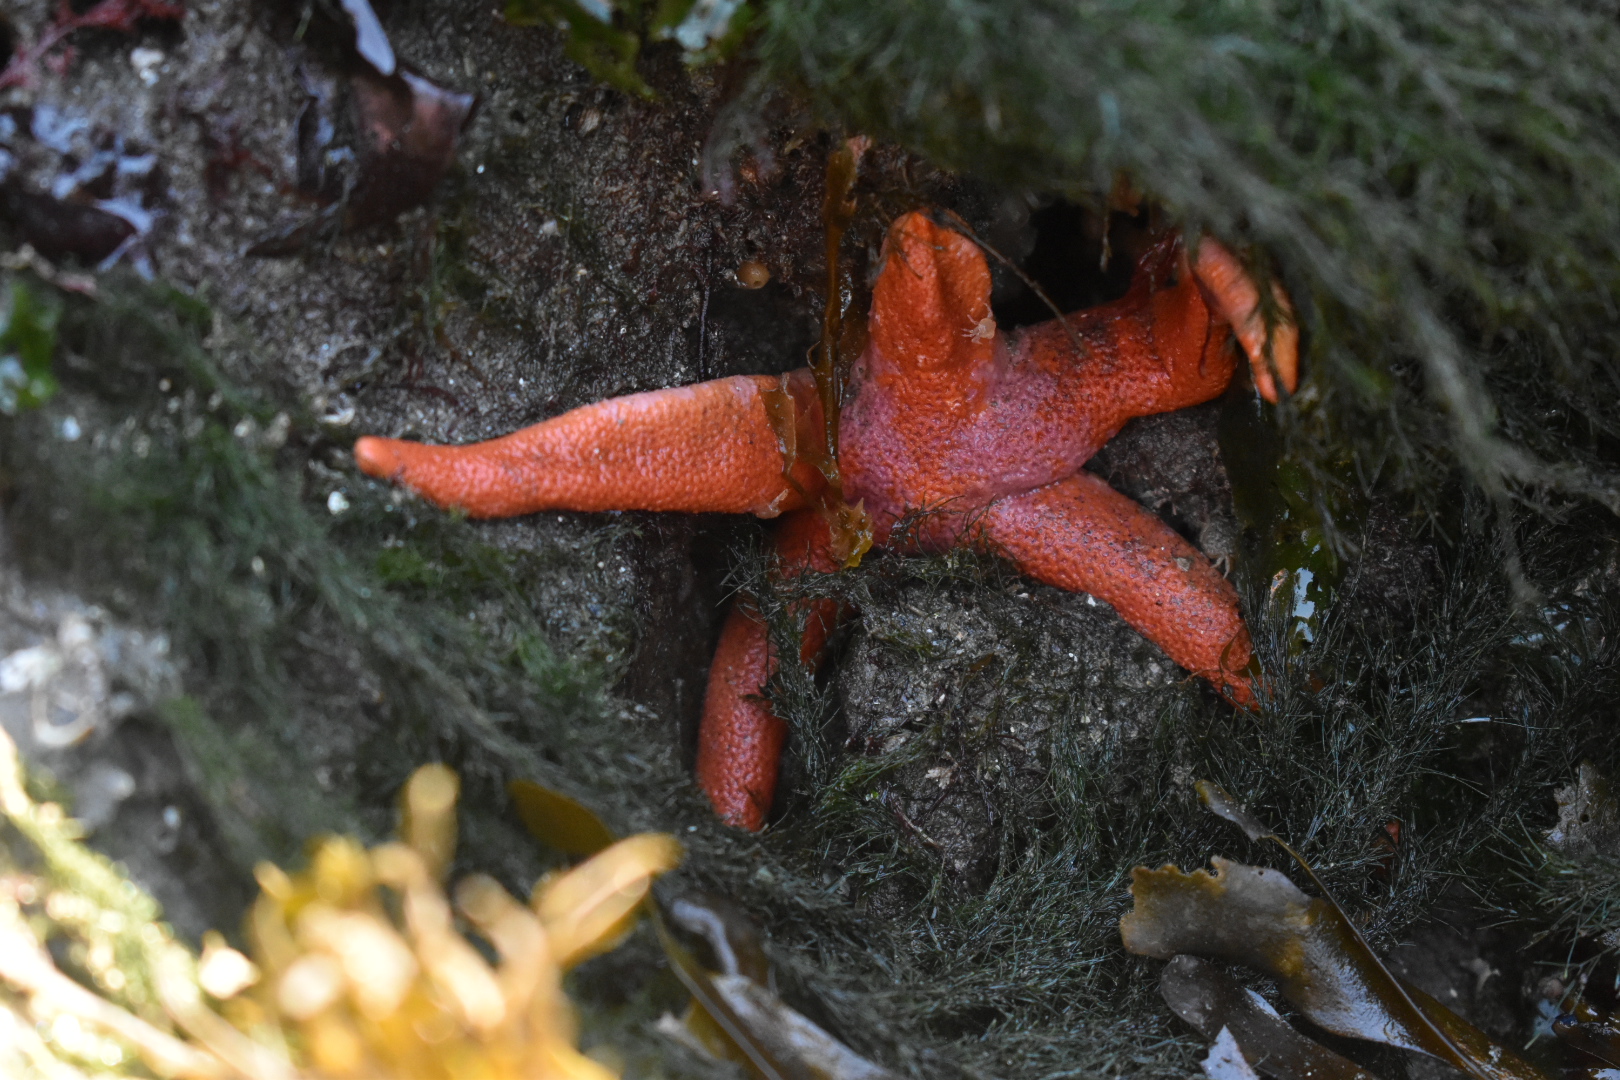 Picture of a Blood Star found during an adventure on the Olympic Peninsula.